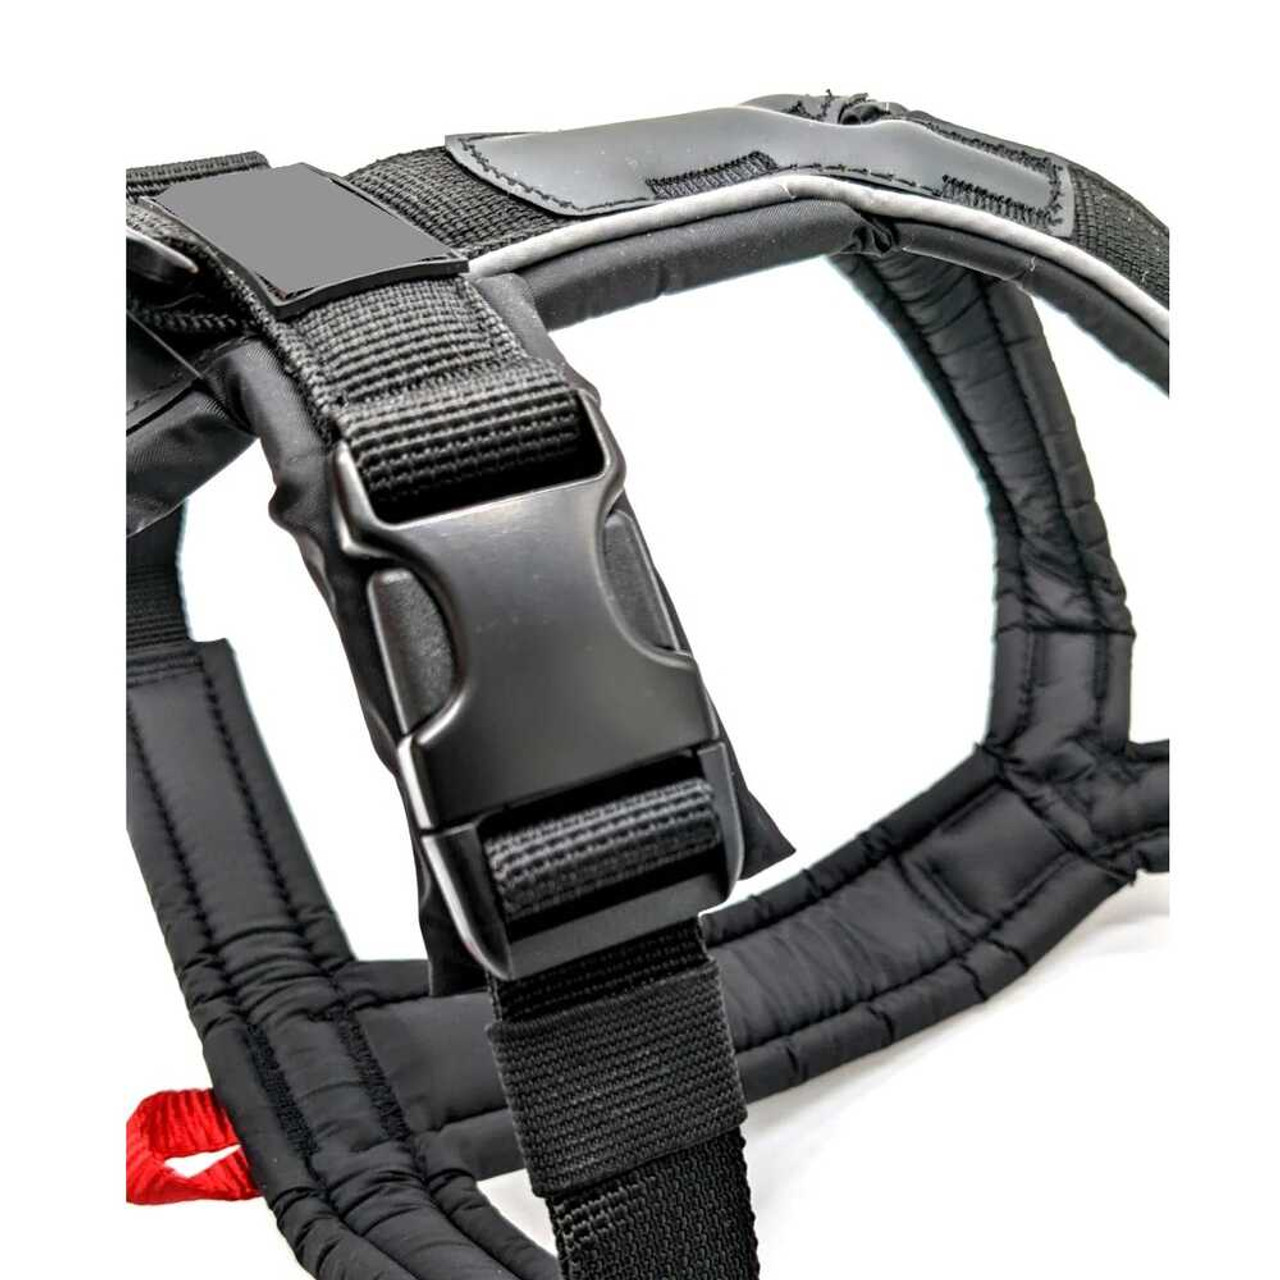 Strong Fit K9 Wear Dog Harness All Black